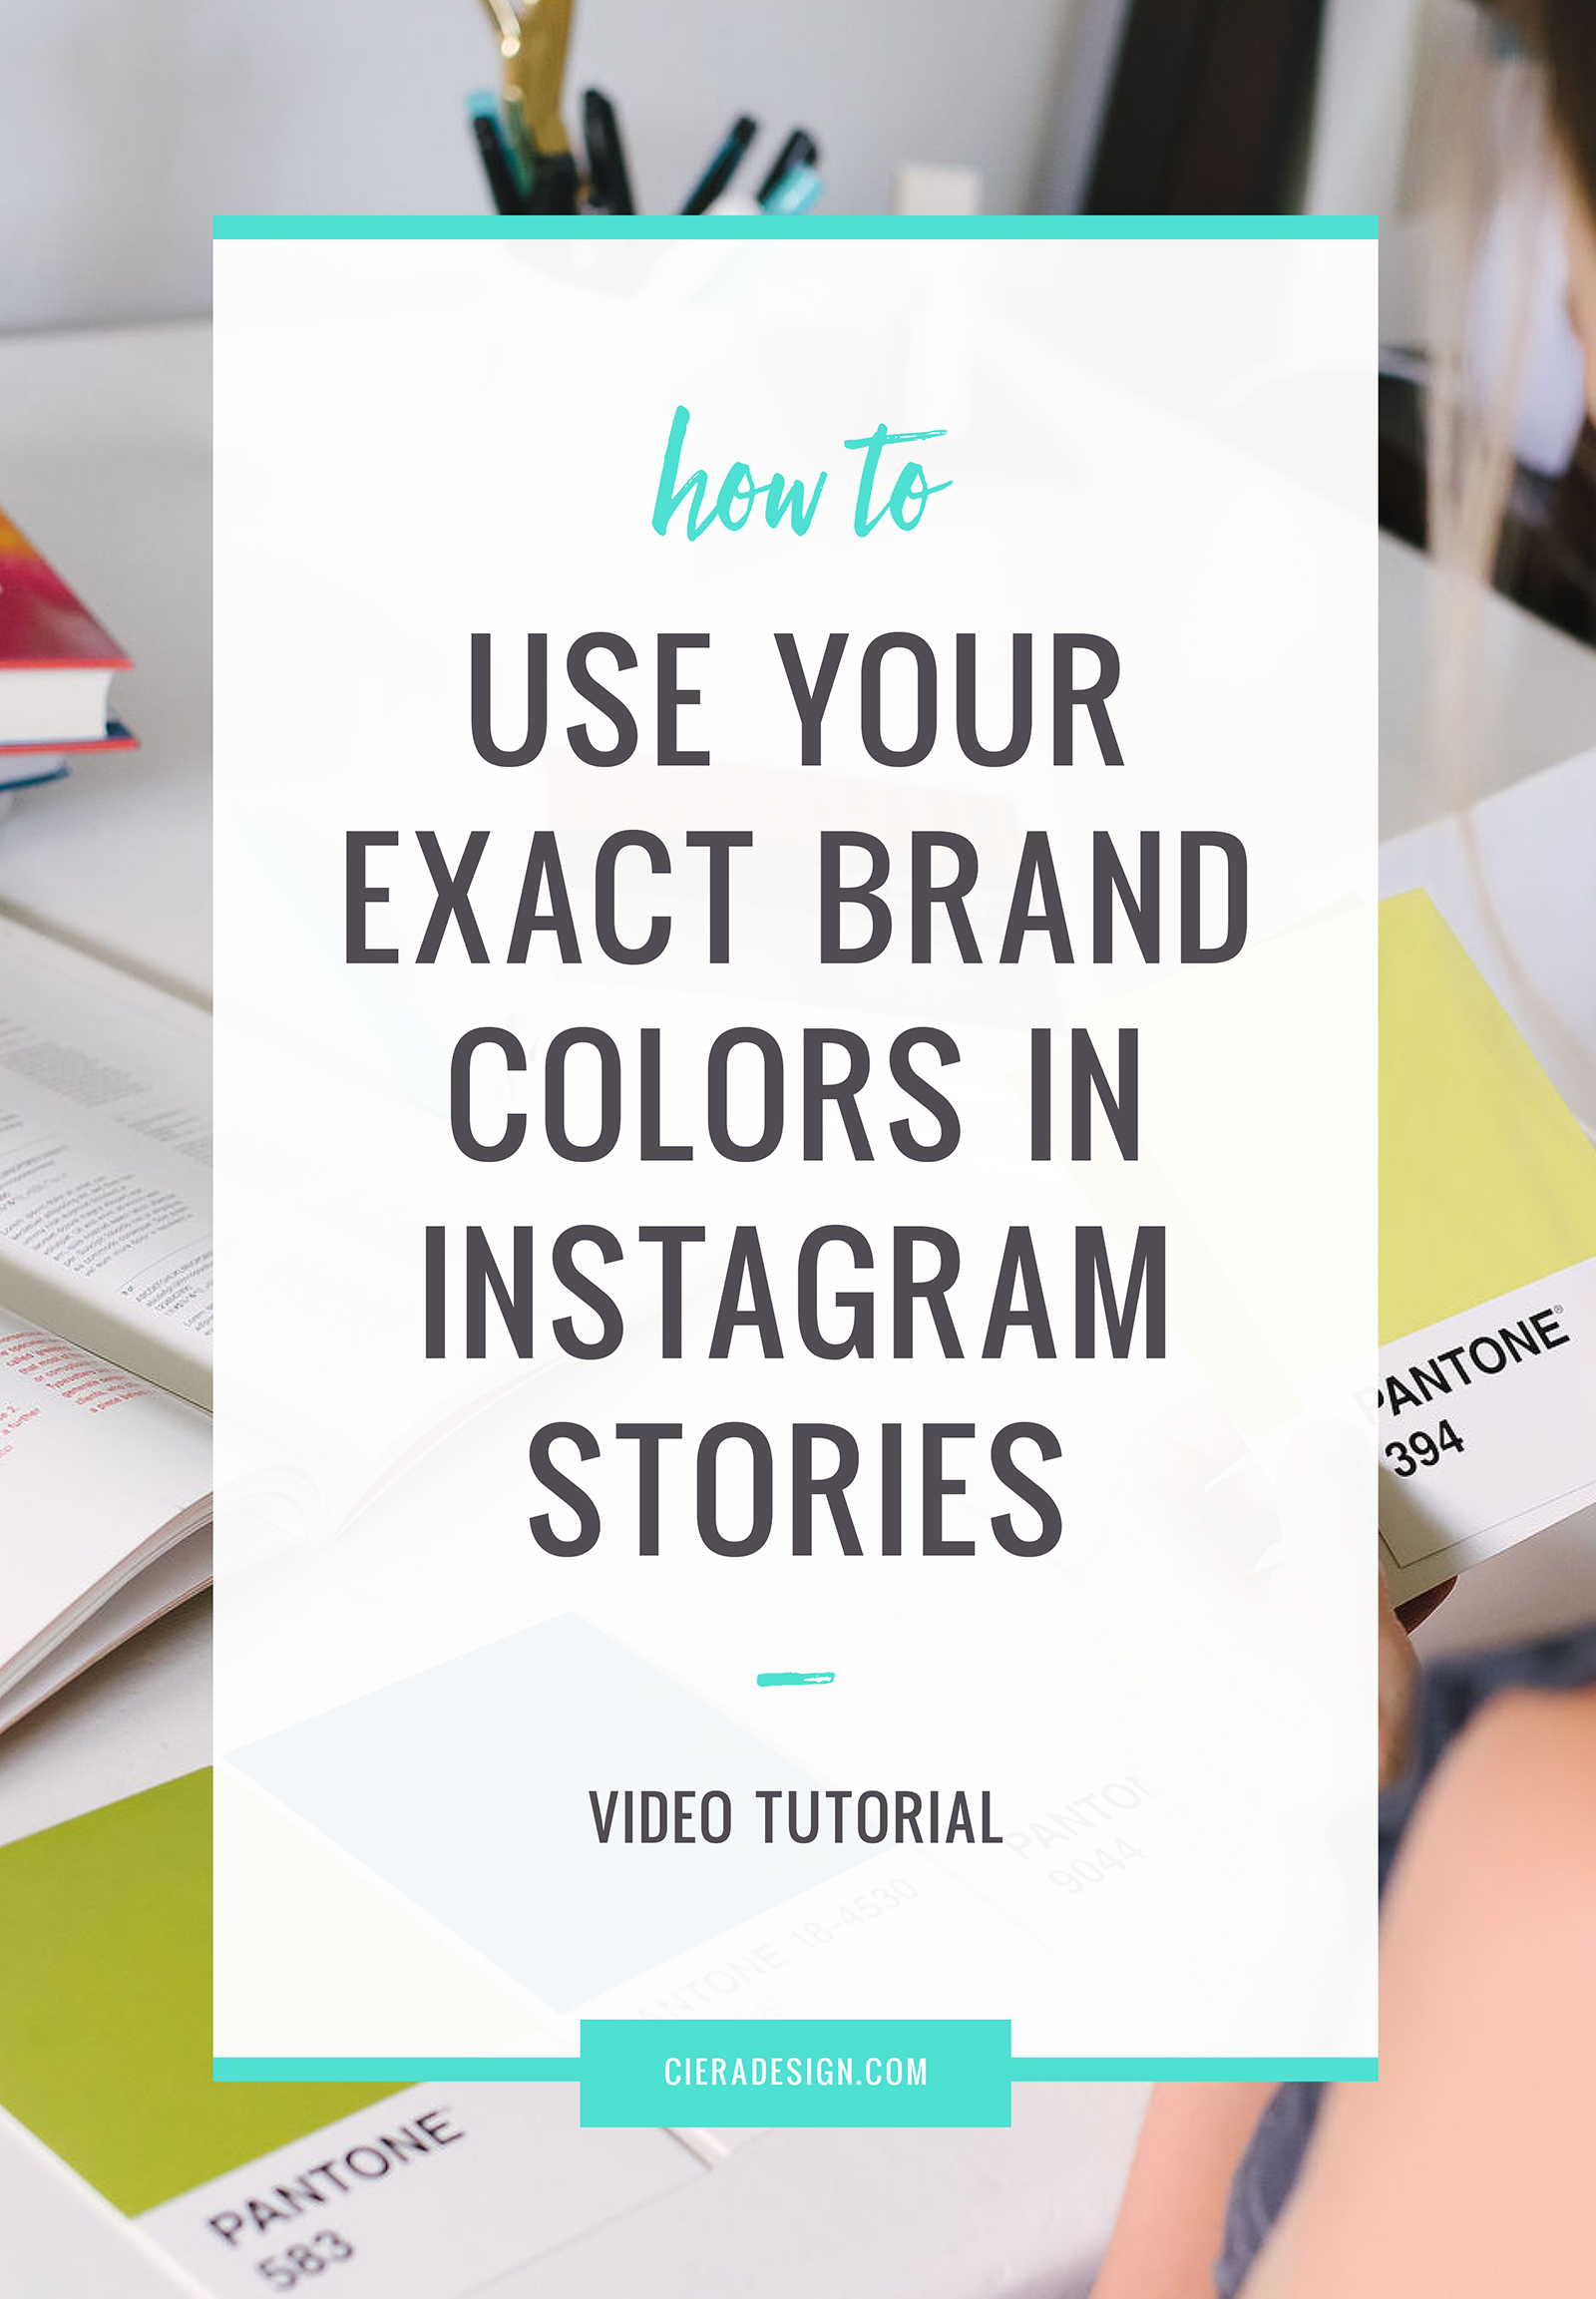 How and why to use your brand colors in Instagram stories. For starters... Research finds that color increases brand recognition by 80%. 
